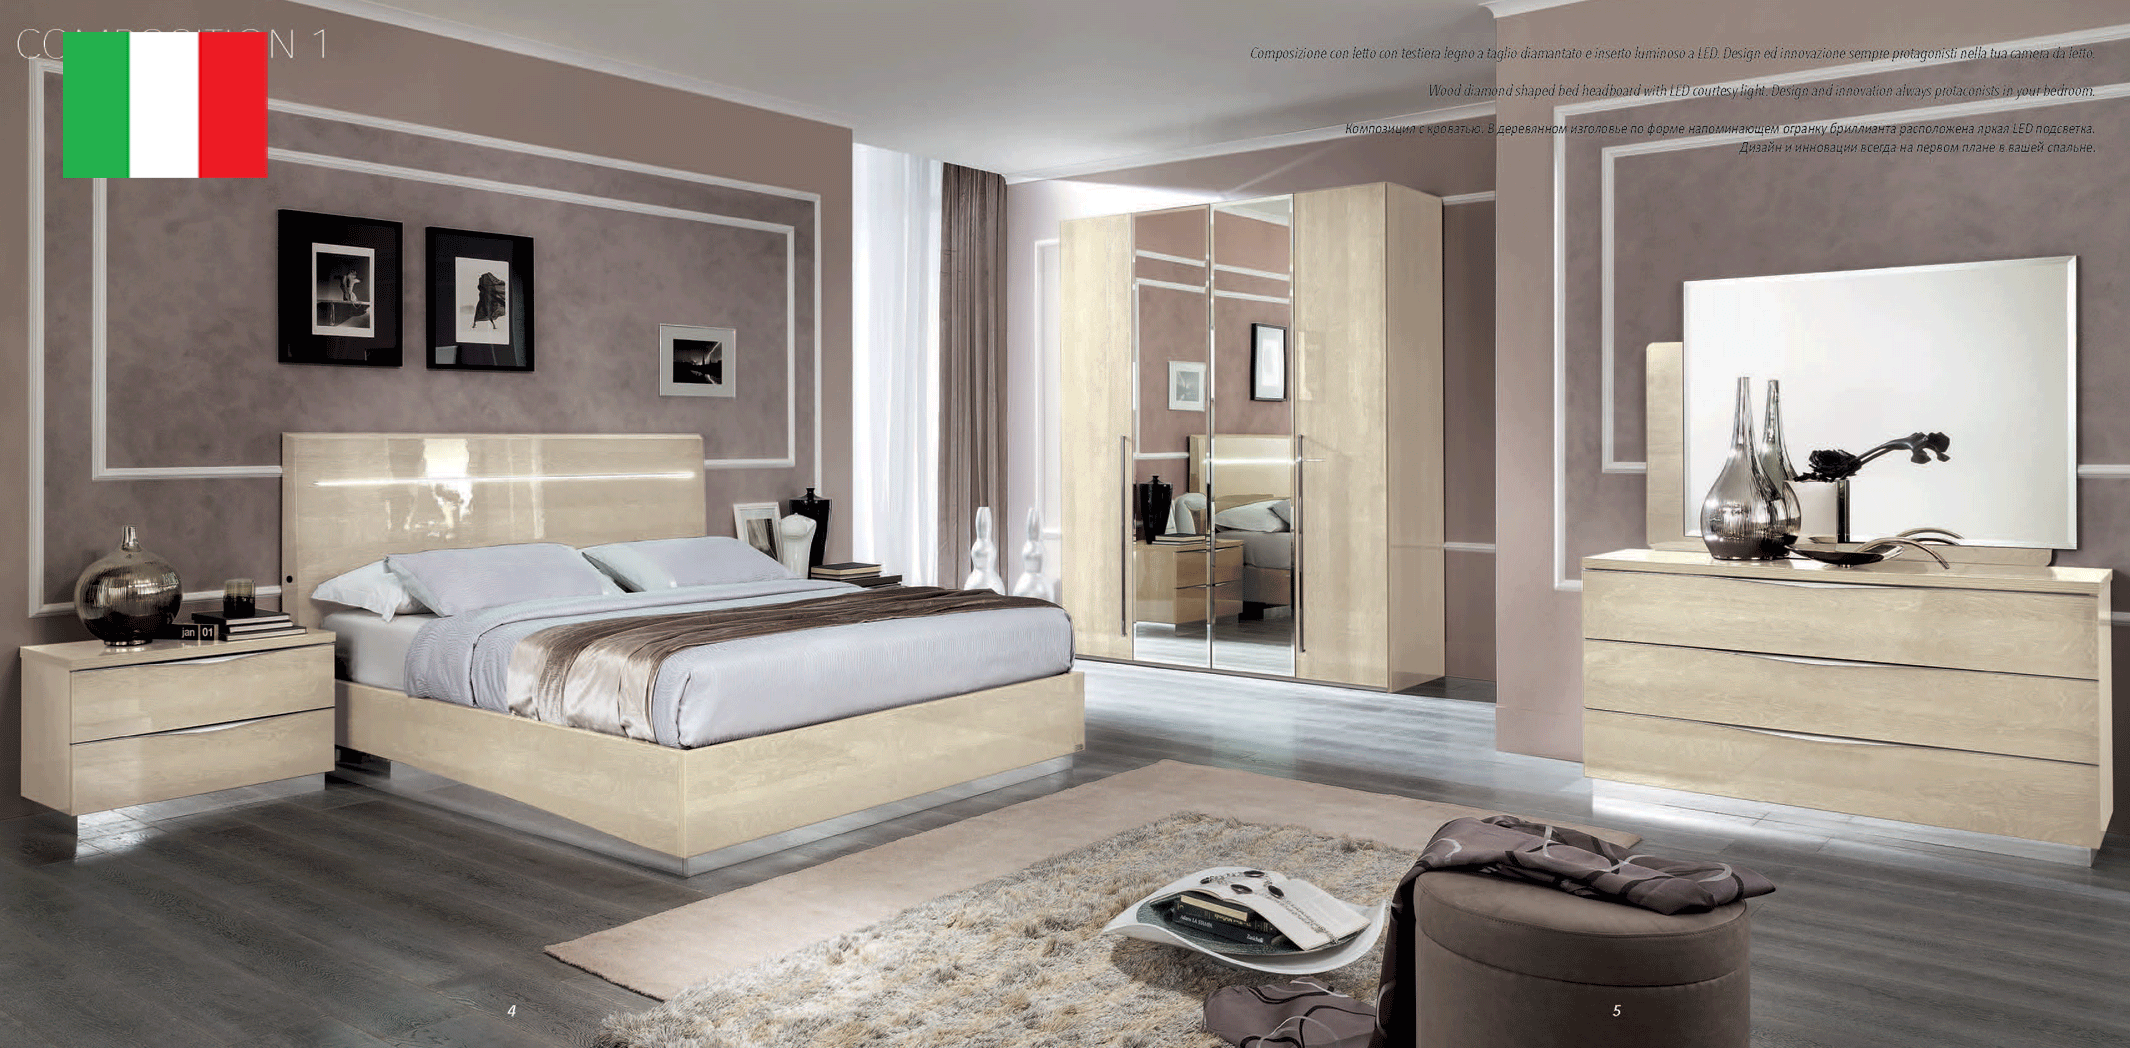 Brands Camel Modum Collection, Italy Platinum Bedroom BETULLIA SABBIA by Camelgroup – Italy